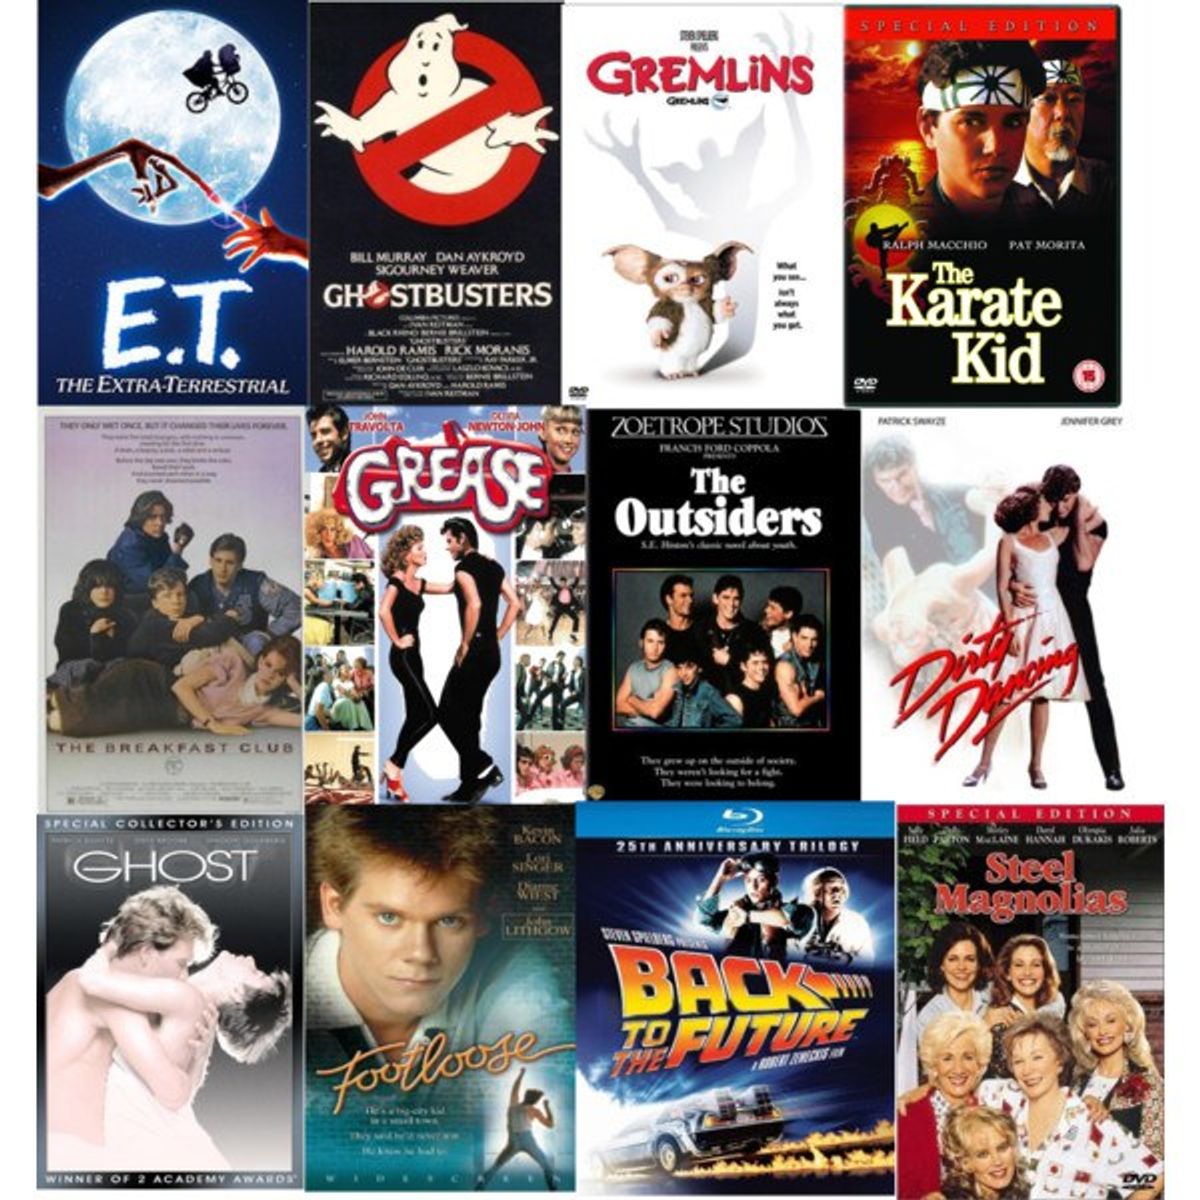 My Top 10 Favorite Films From The 1980s